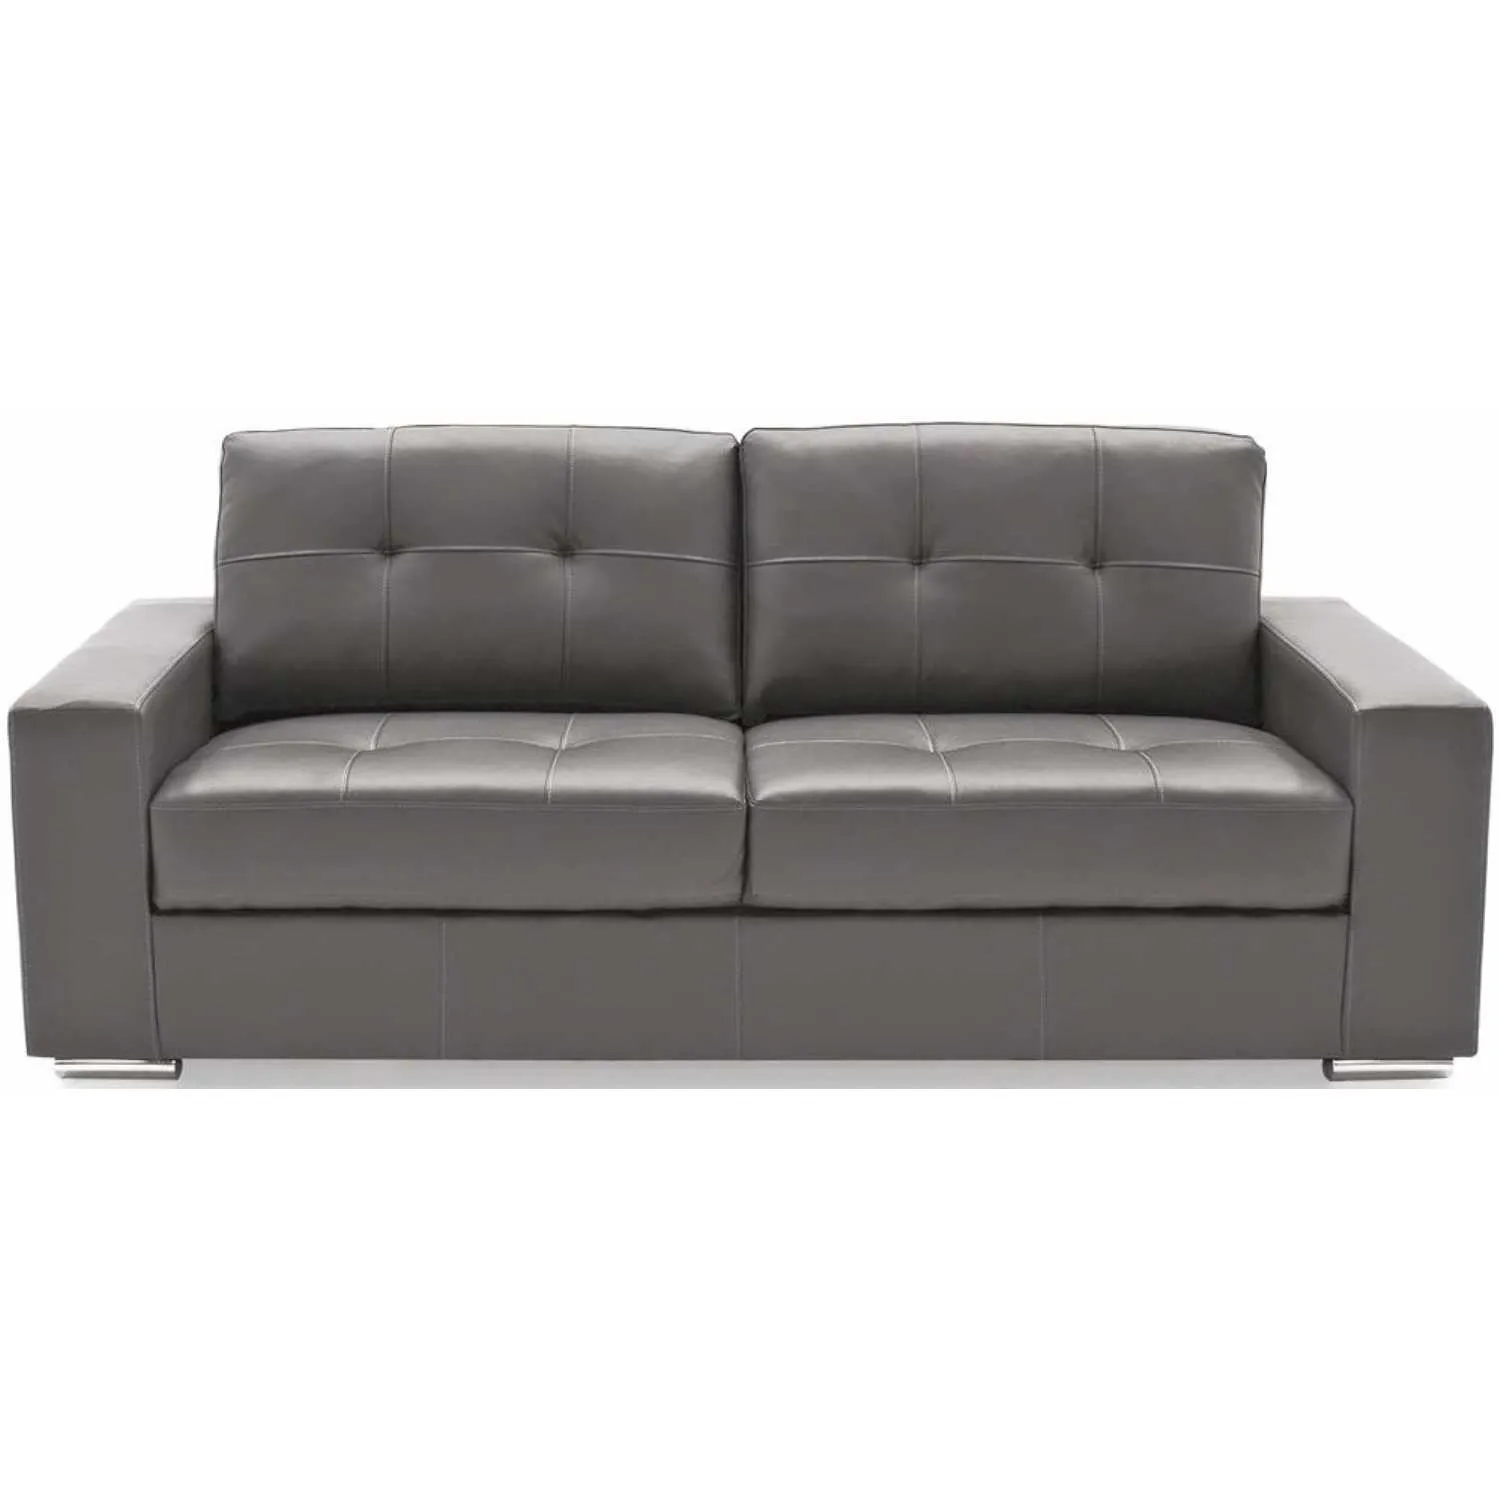 Grey Leather 3 Seater Large Buttoned Back Sofa